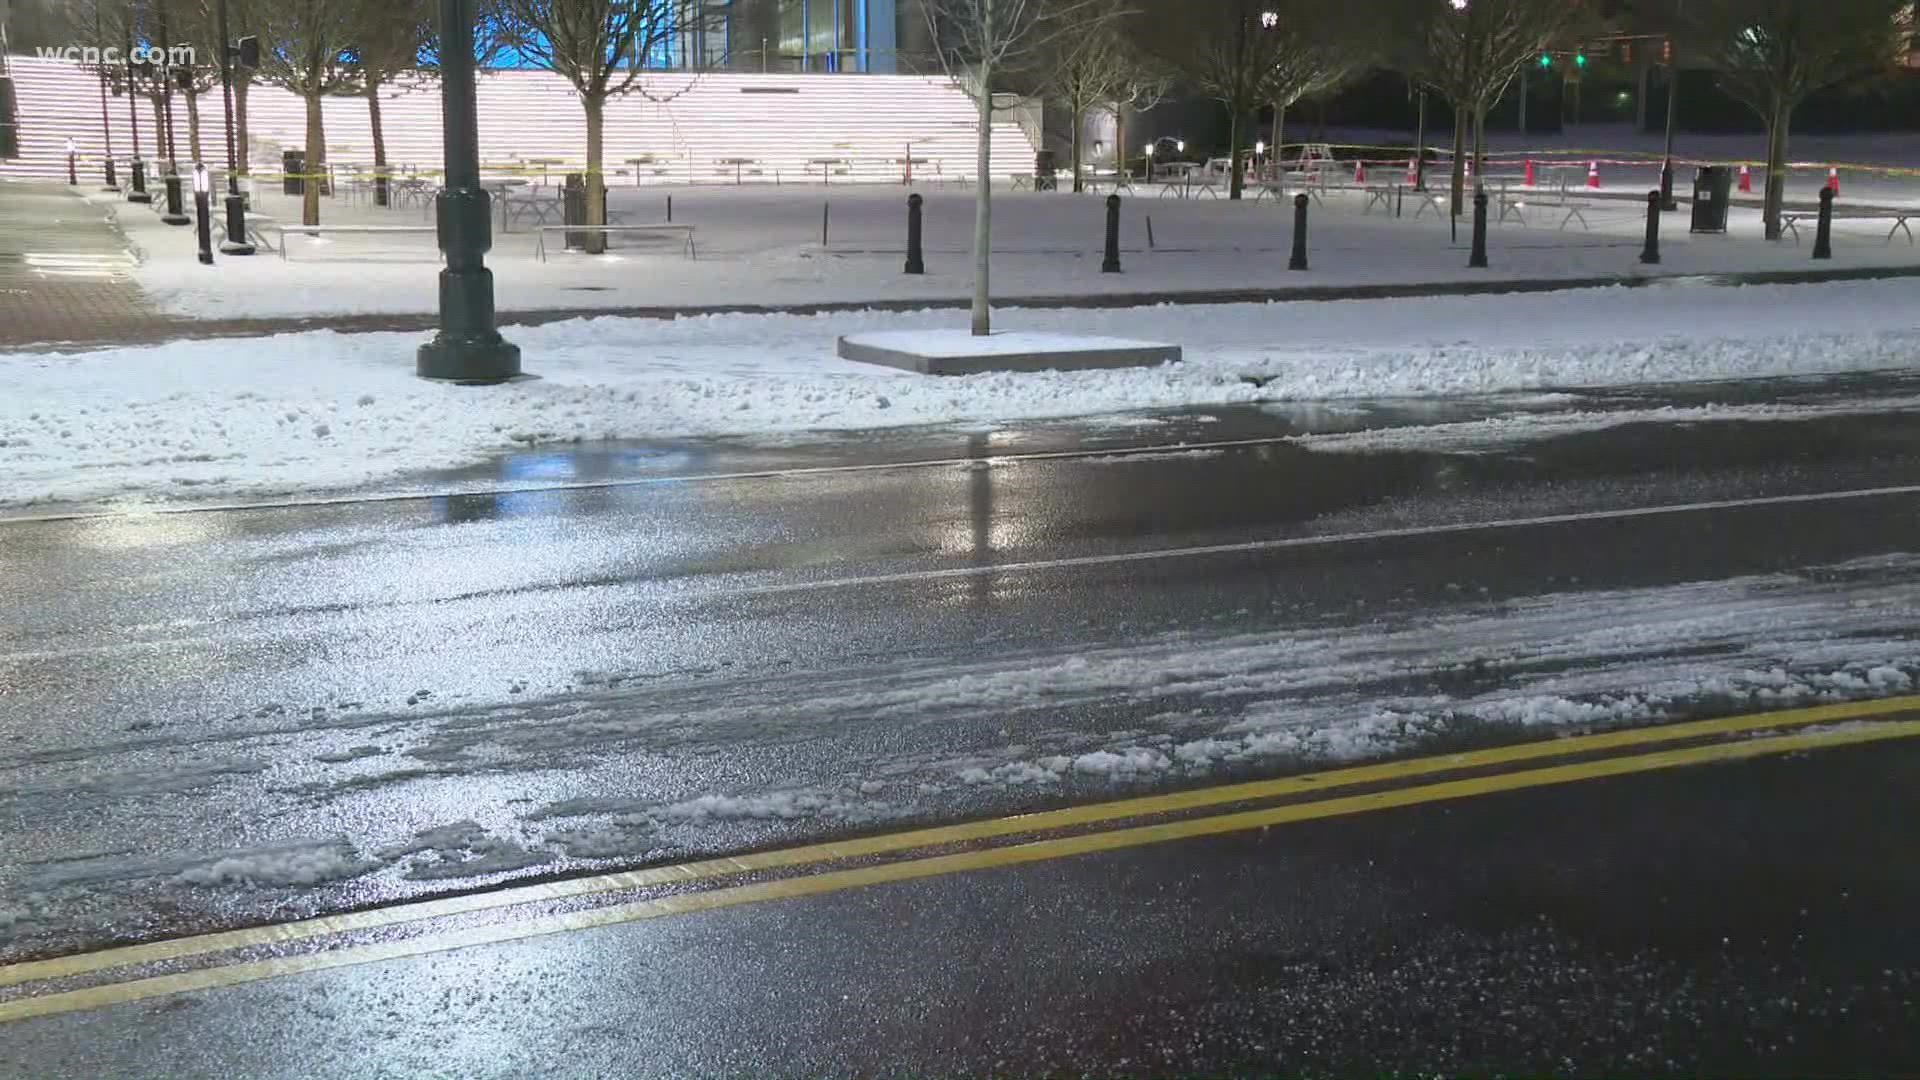 Many roads are still covered with snow and ice following Sunday's winter storm. Officials are asking people to stay home unless travel is absolutely necessary.